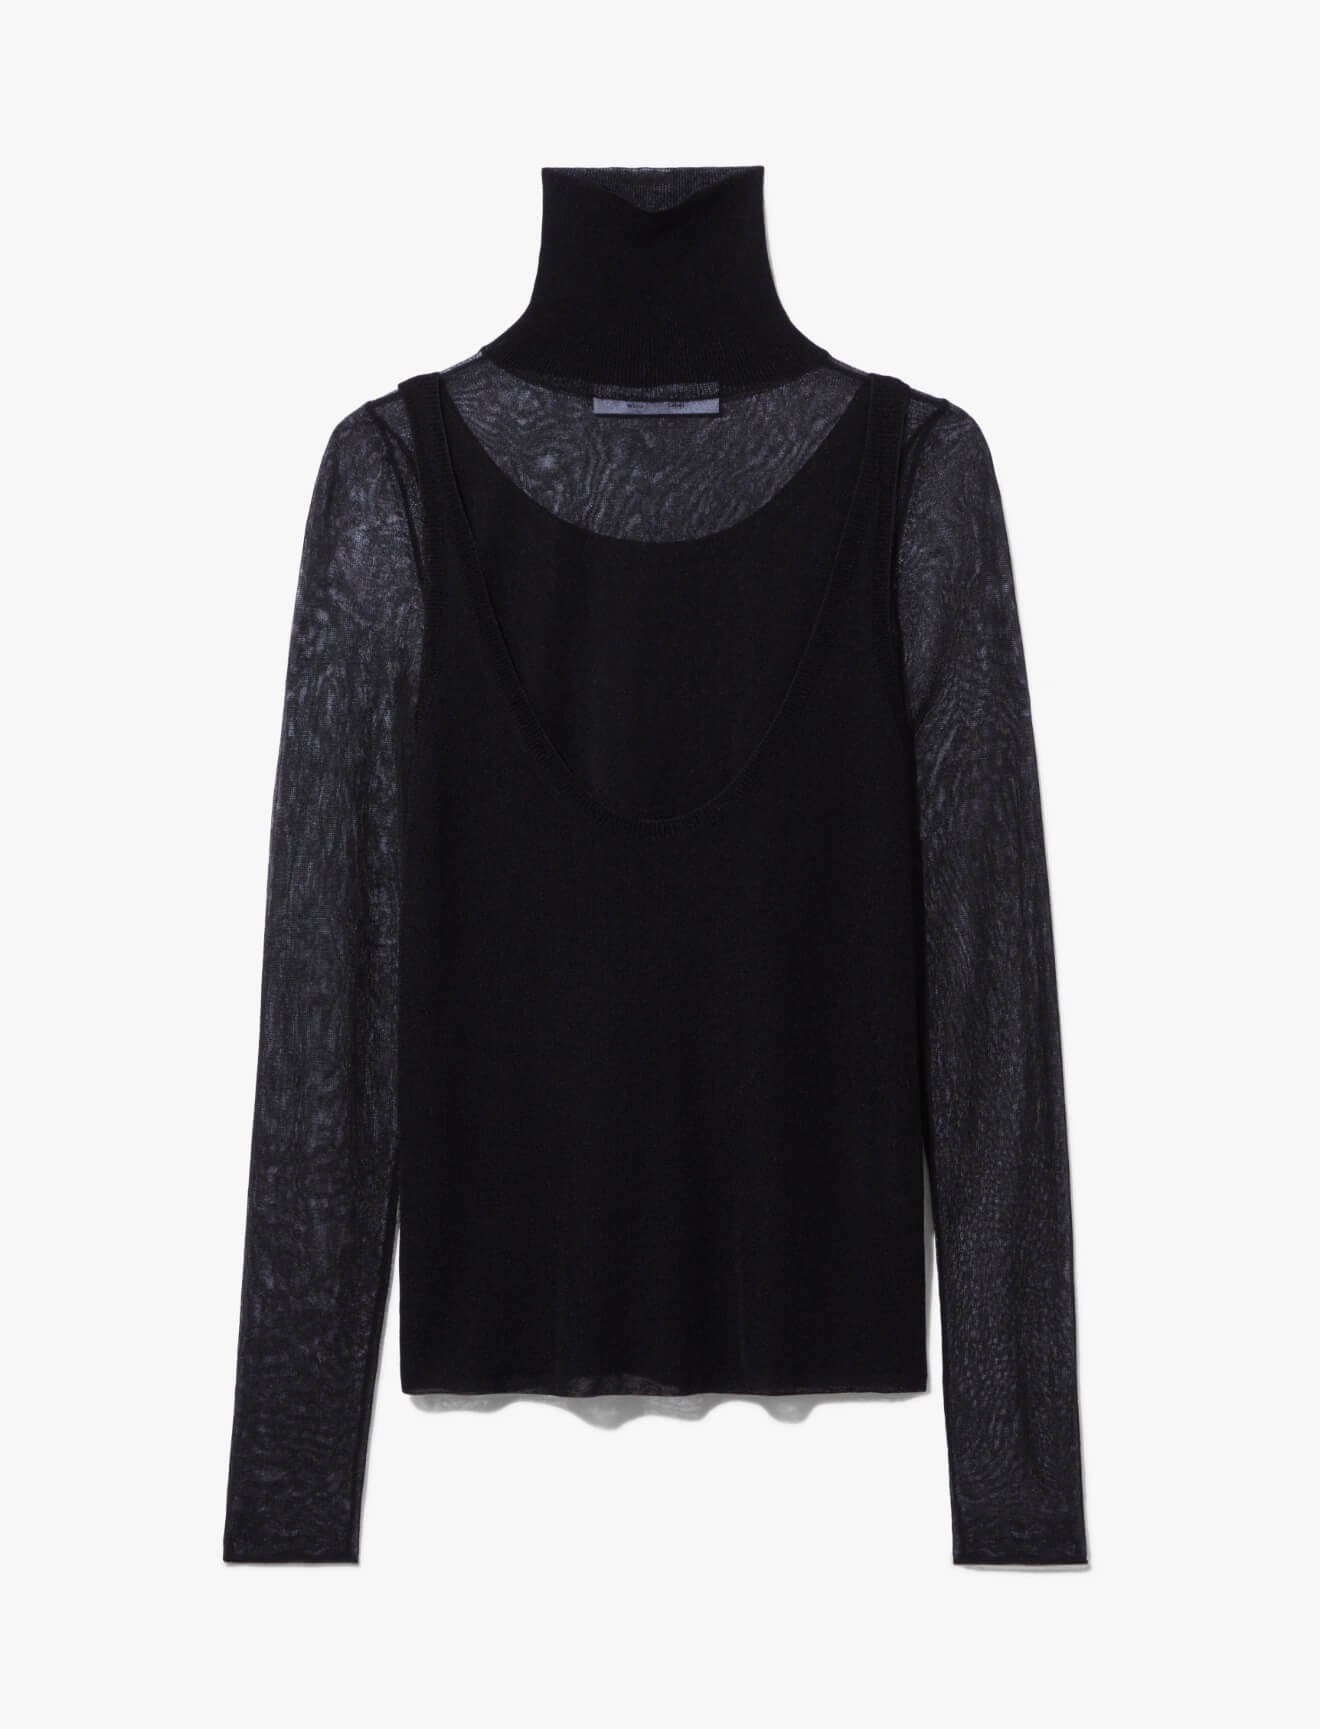 PROENZA SCHOULER WHITE LABEL T-Neck Layered Knit Top